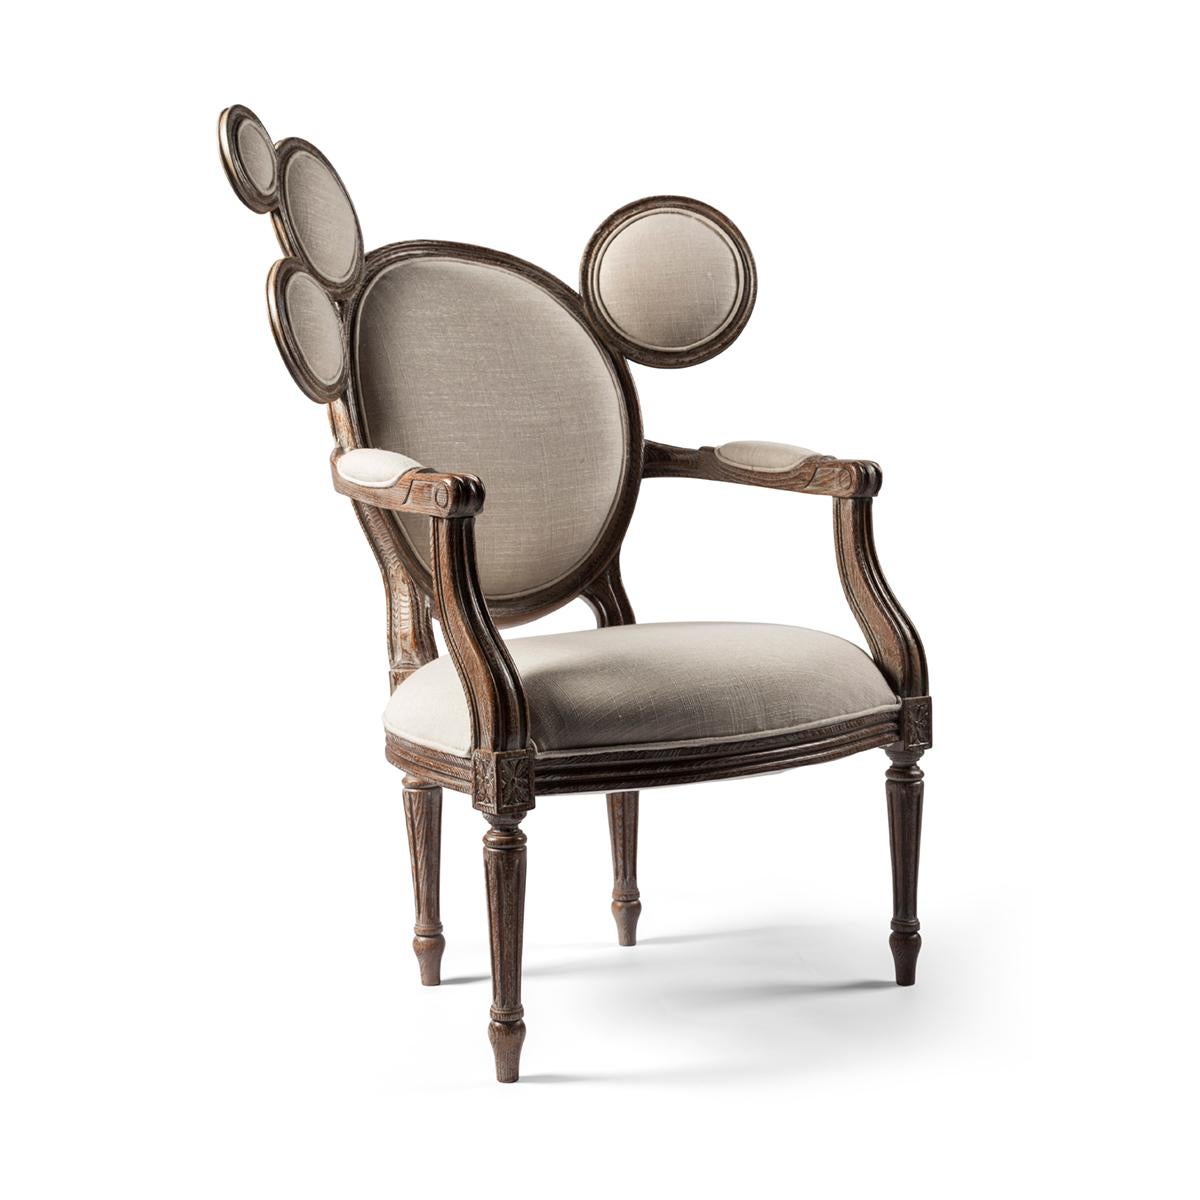 Subverting is nothing more than revolving from the bottom up and then disarrange an established idea. With this in mind, this re-reading of the traditional Louis XVI armchair subverts its original shape. The Classic piece gains appliques in the back